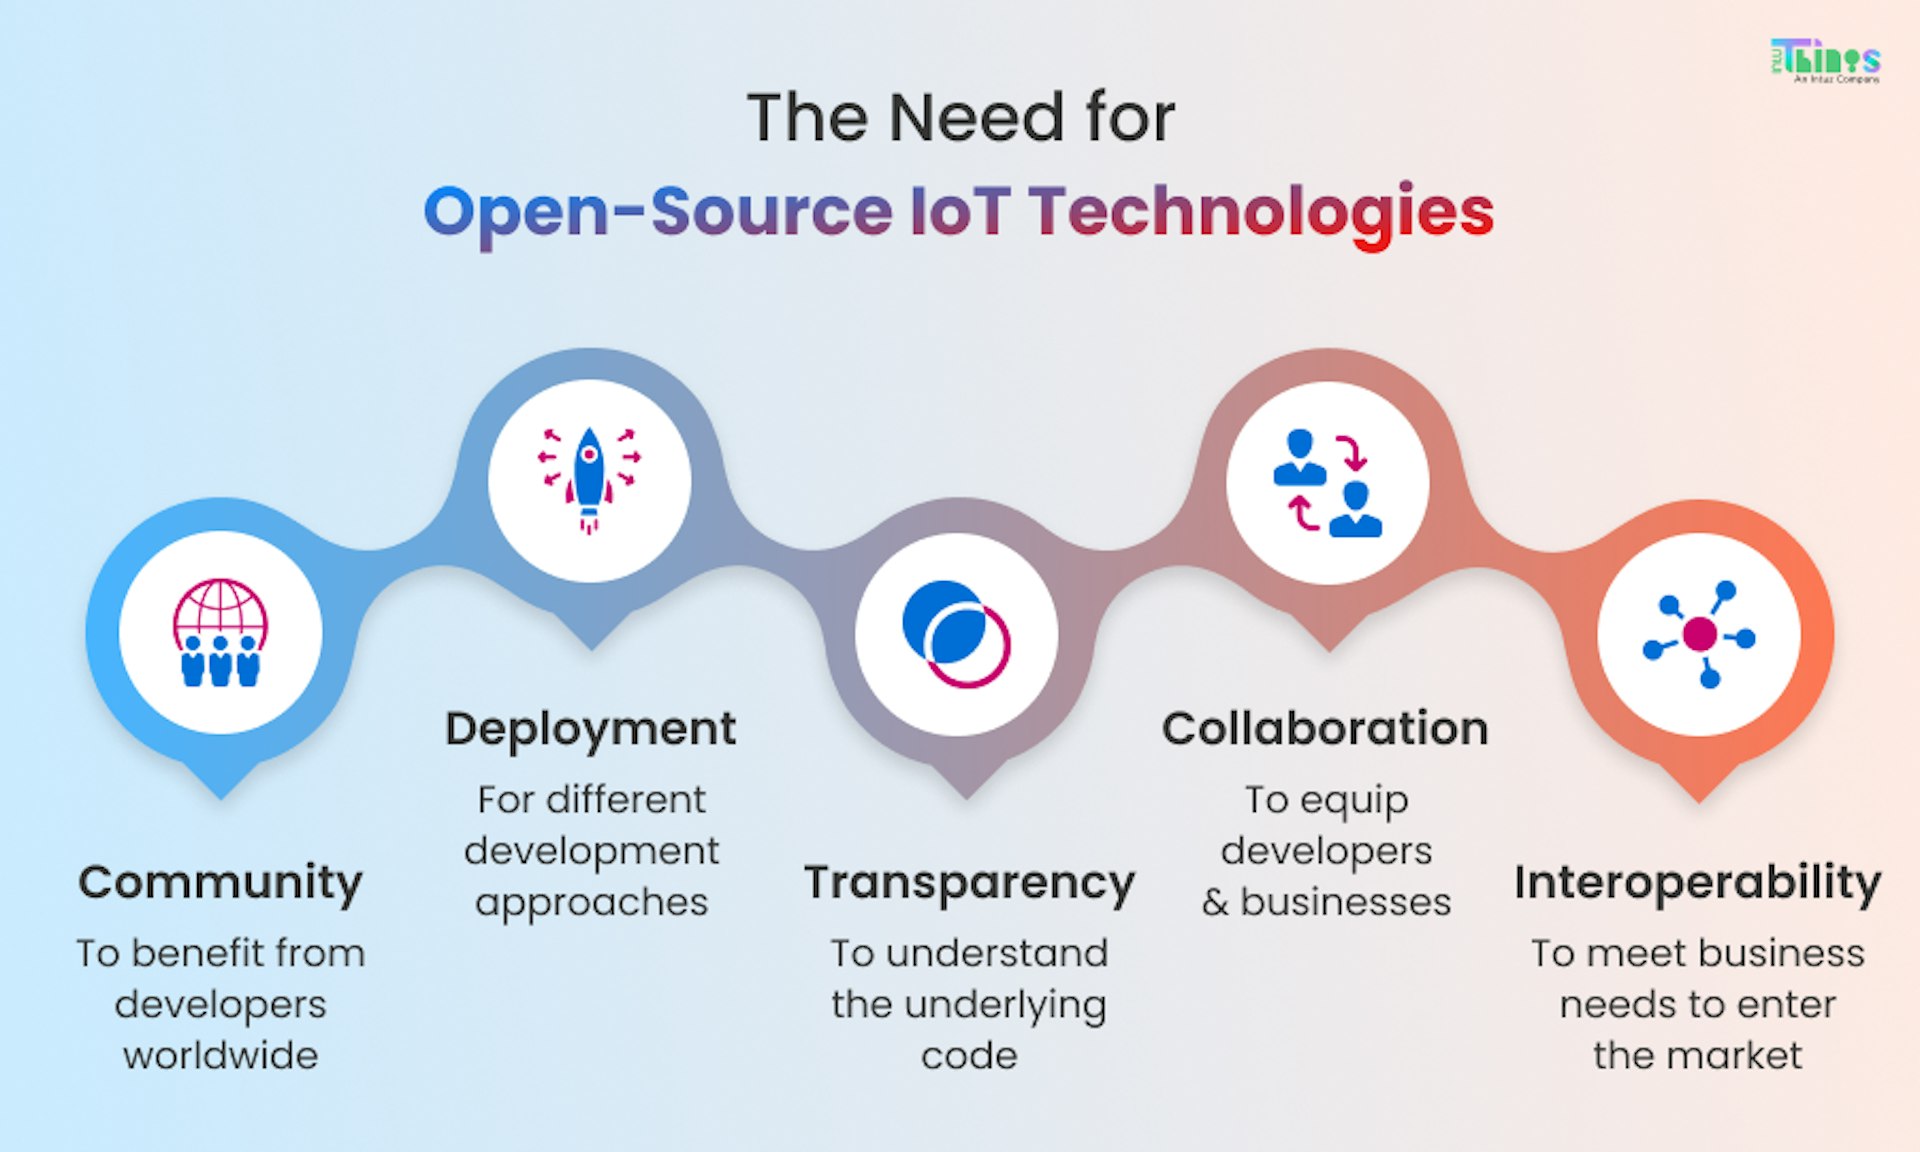 The Need for Open-Source IoT Technologies